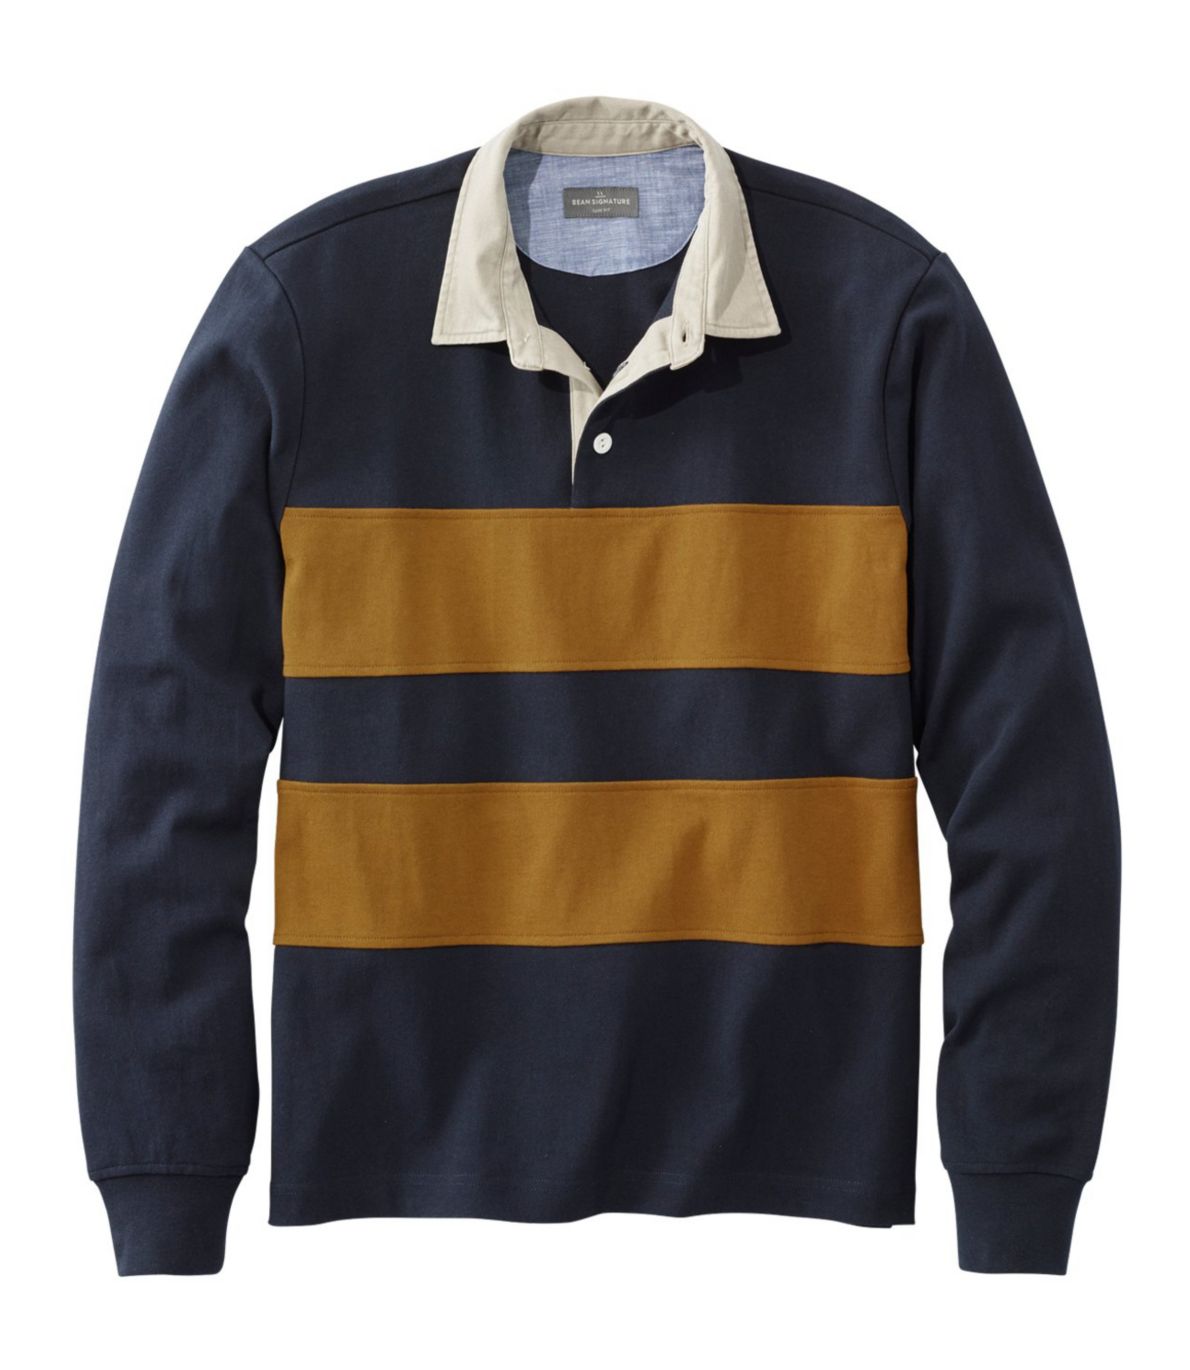 Men's Signature Classic Rugby Shirt, Long-Sleeve Stripe